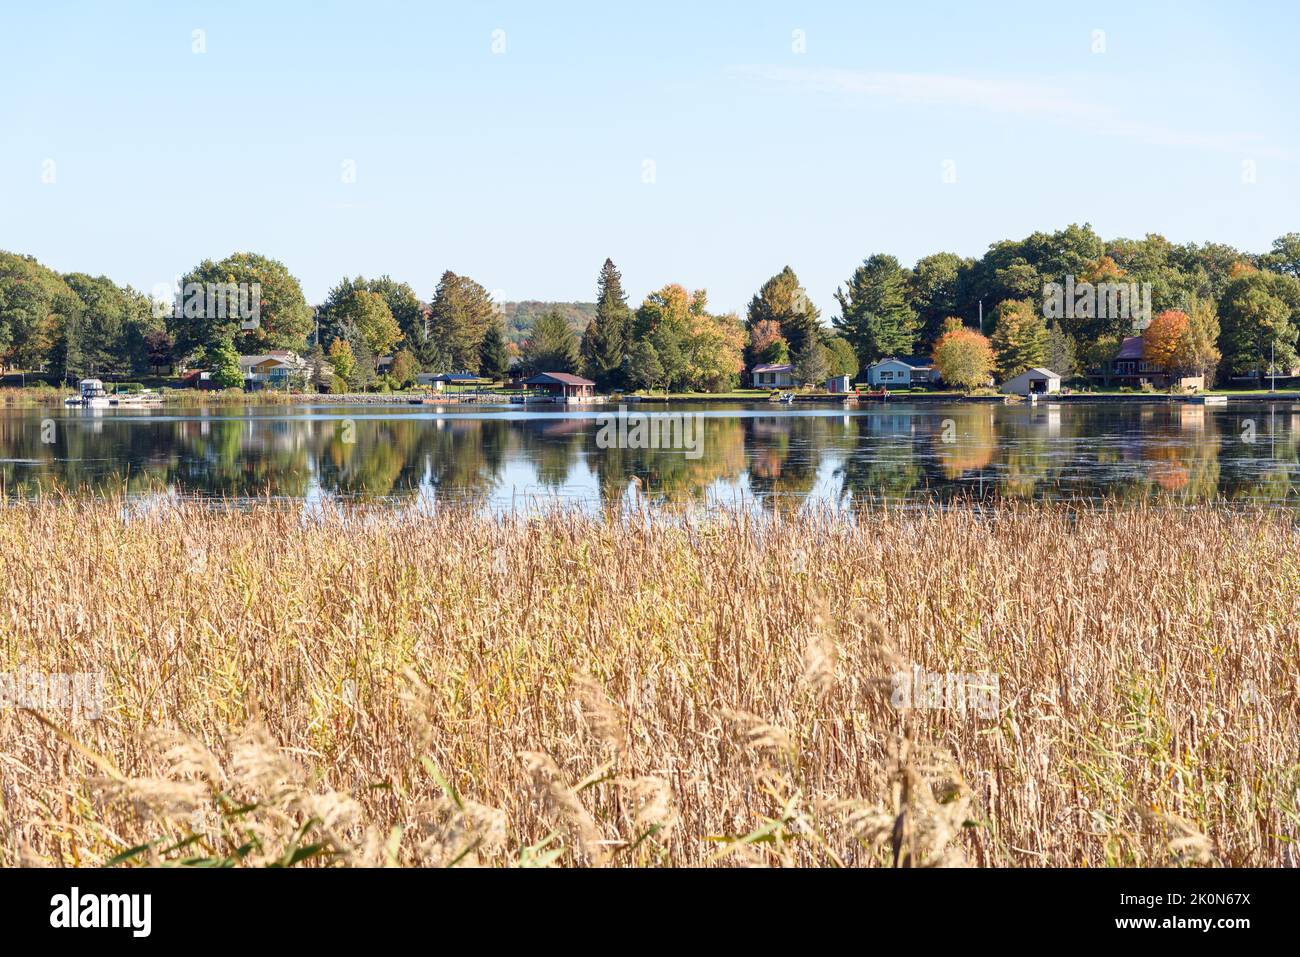 Riverside holiday houses on the wooded bank of a river on a sunny autumn day, Reflection in water. Thousand Islands National Park, ON, Canada. Stock Photo